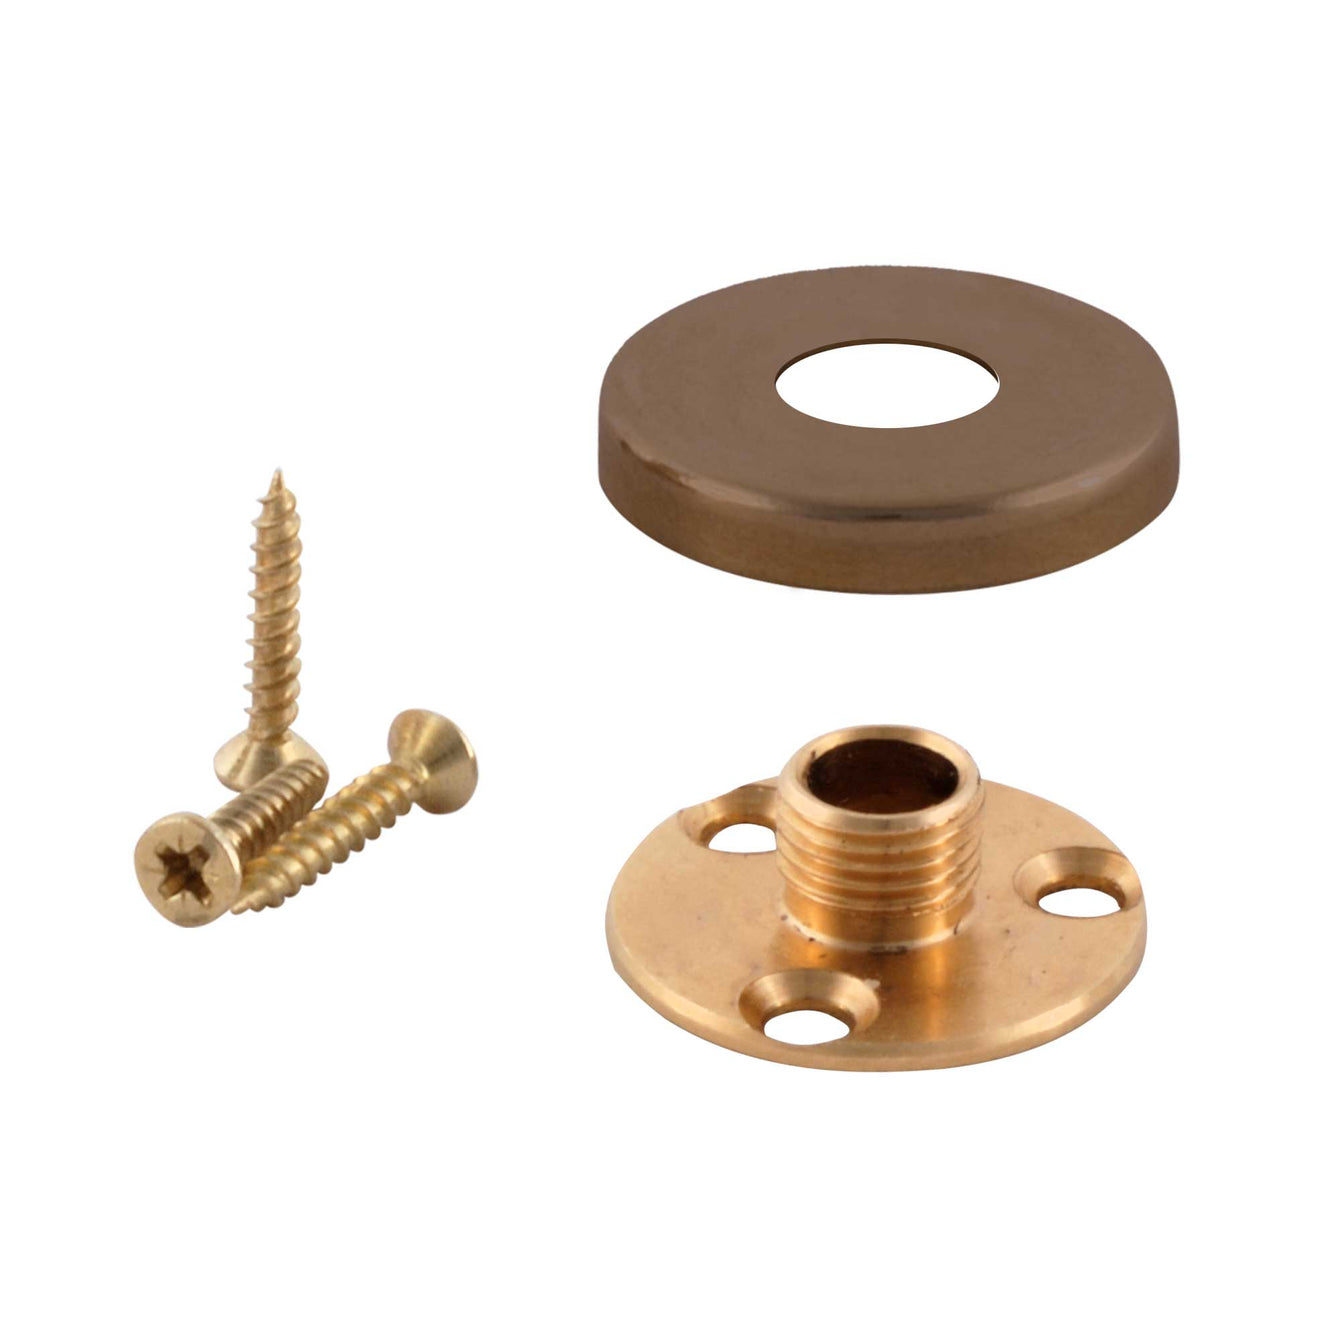 ElekTek Male Thread Back Plate Mount Cover and Screws - For use with B22 E27 Lamp holders Bronze (Brushed Antique) / 10mm